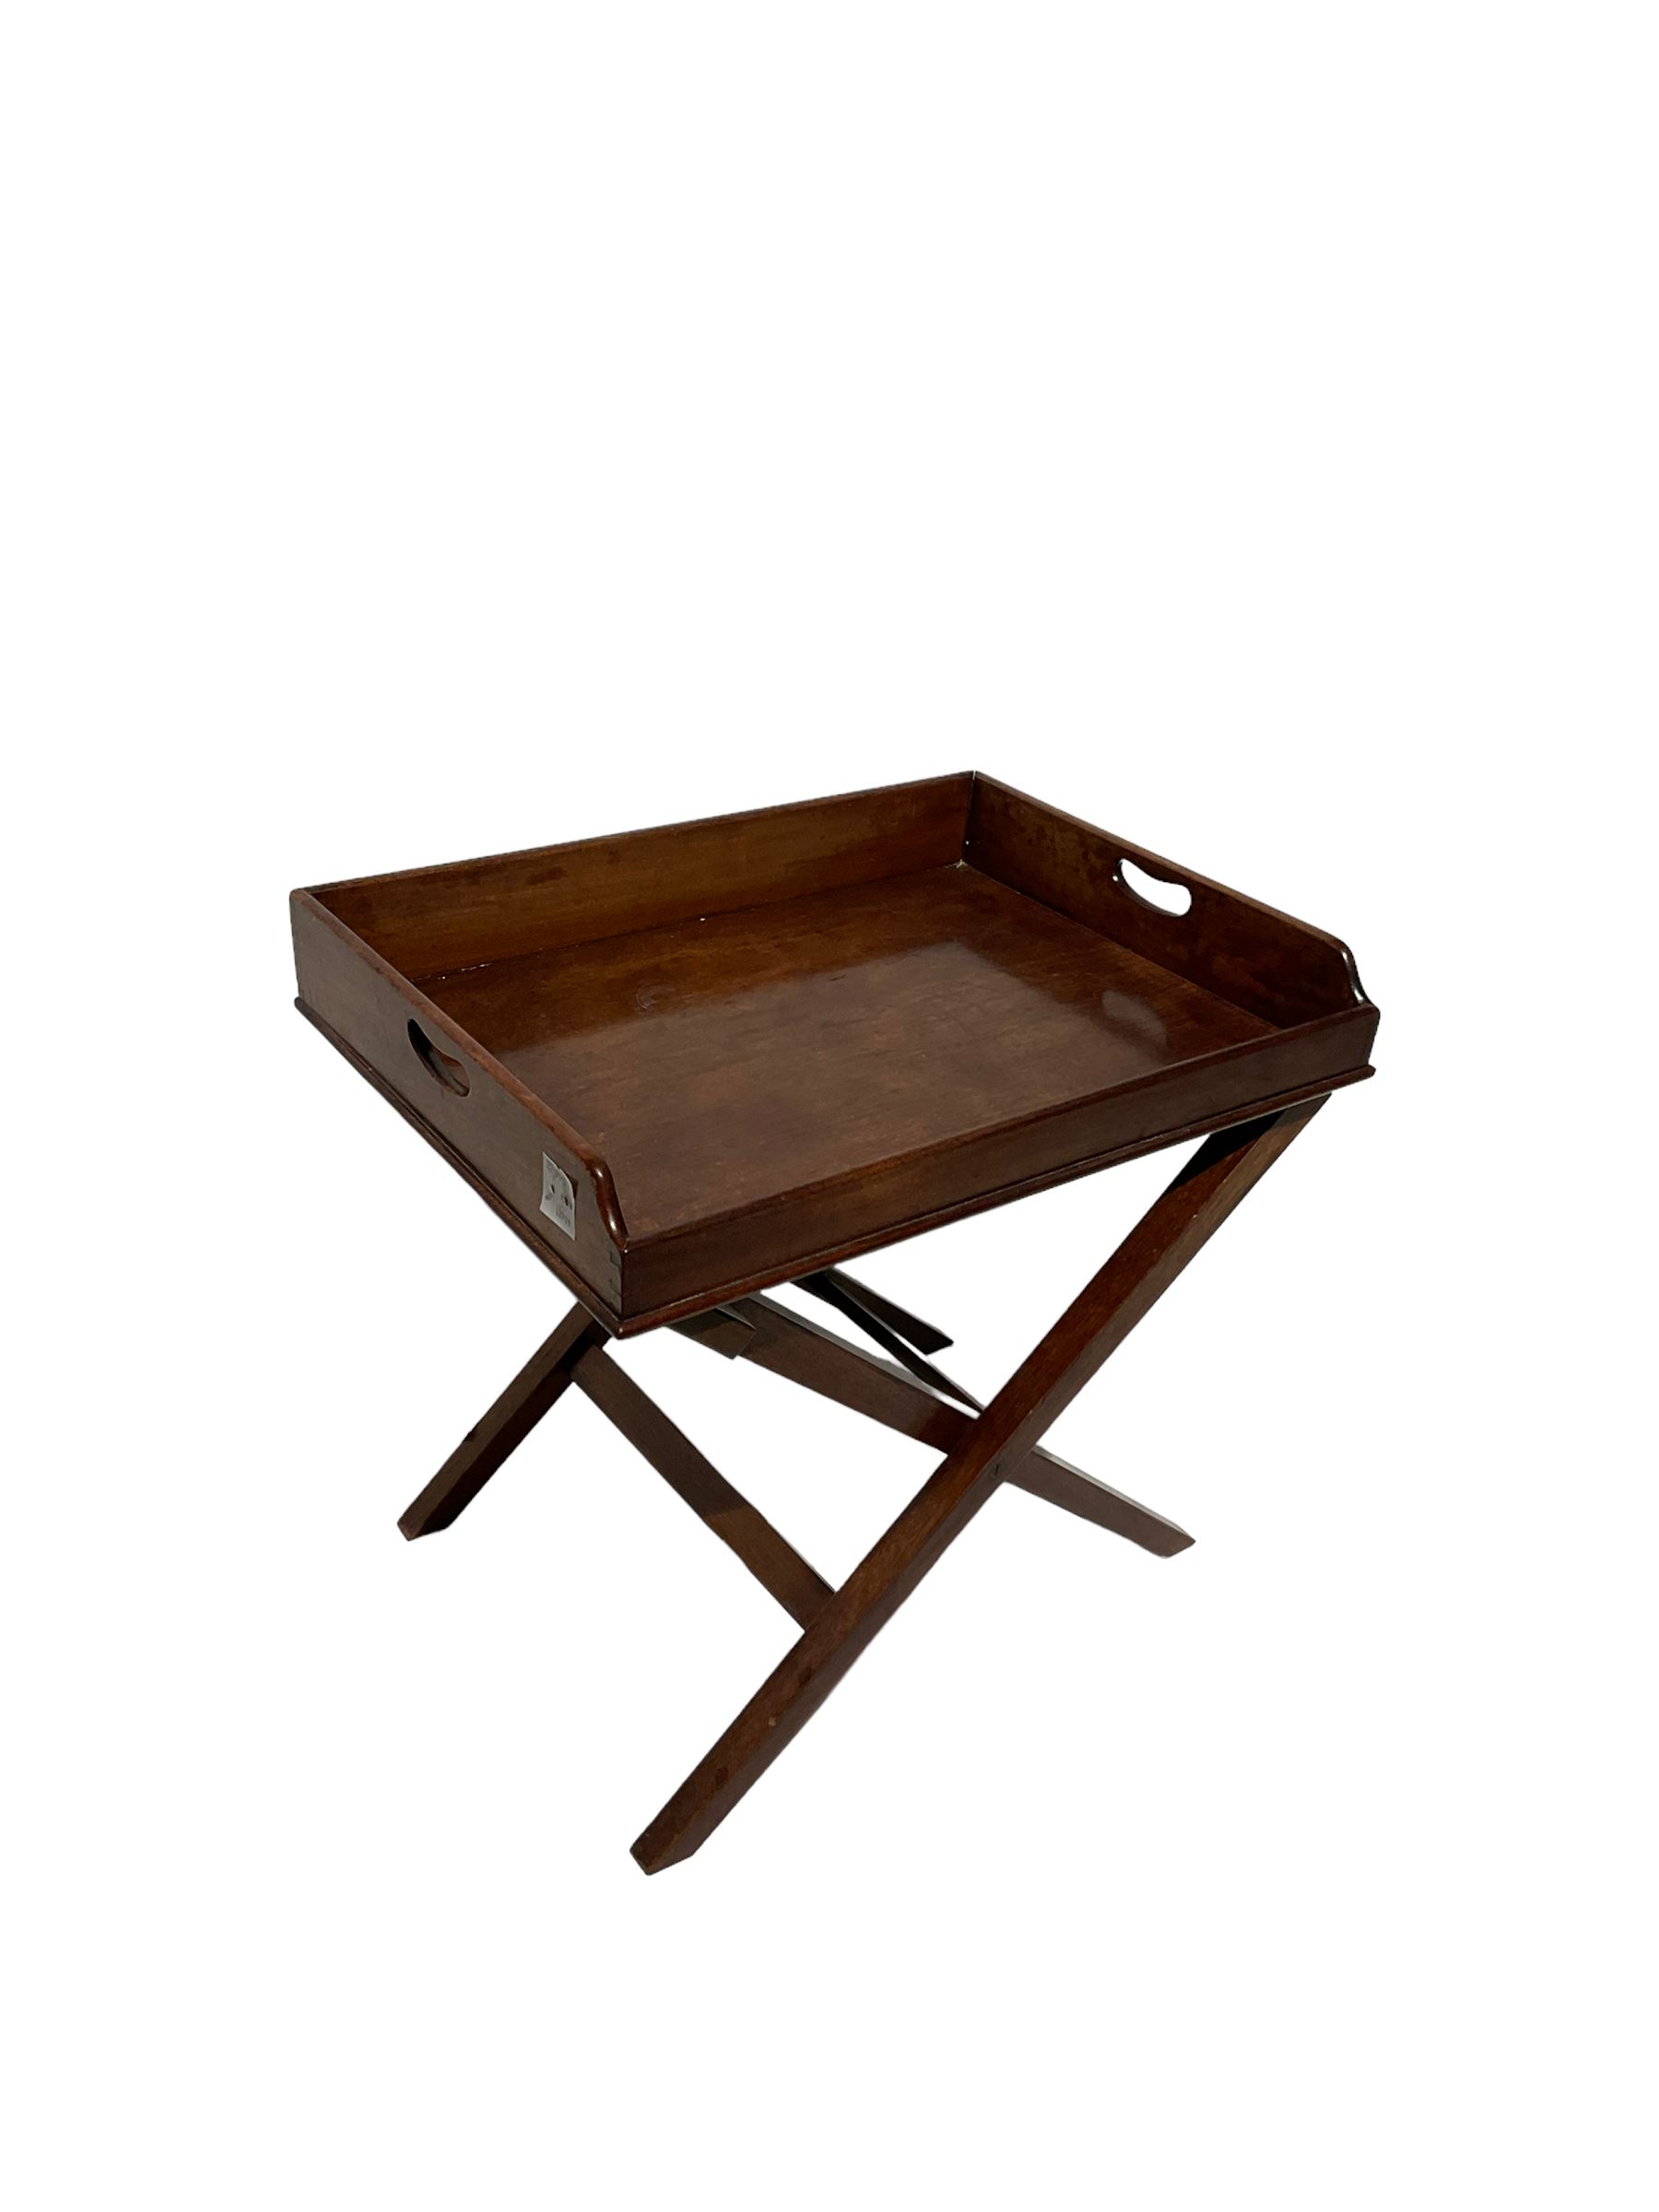 Small mahogany butler's tray on stand - Image 3 of 3